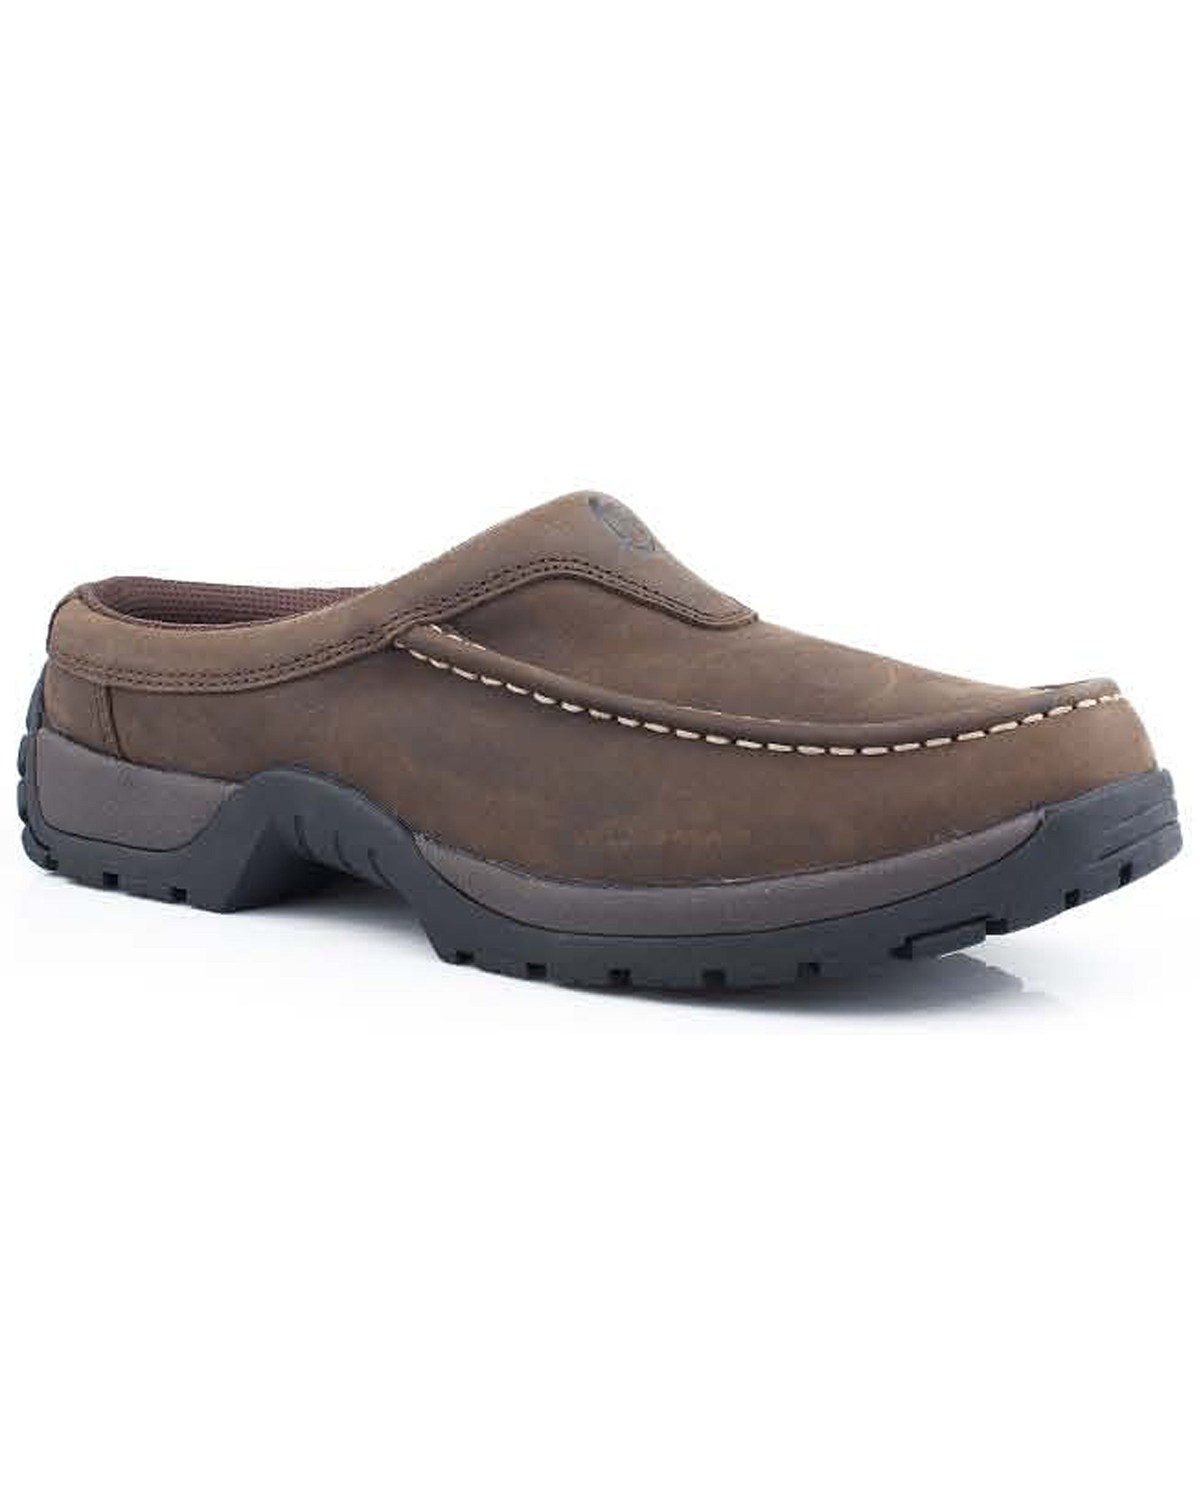 roper casual shoes